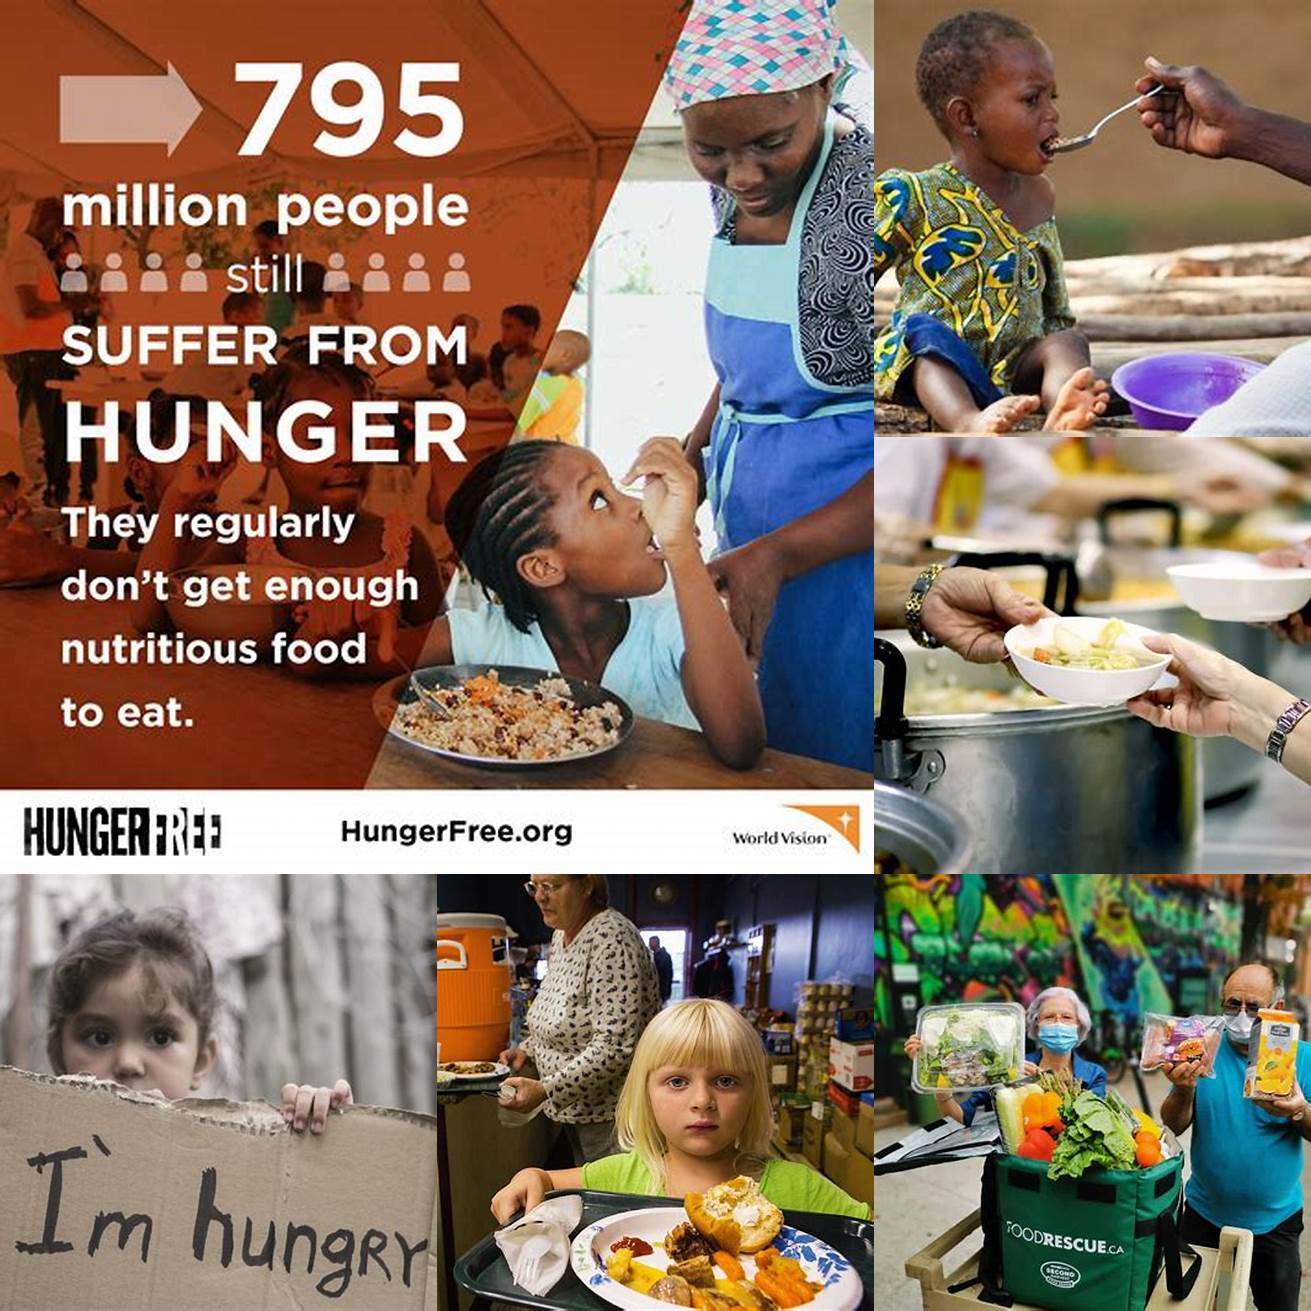 Helps to address food insecurity and hunger